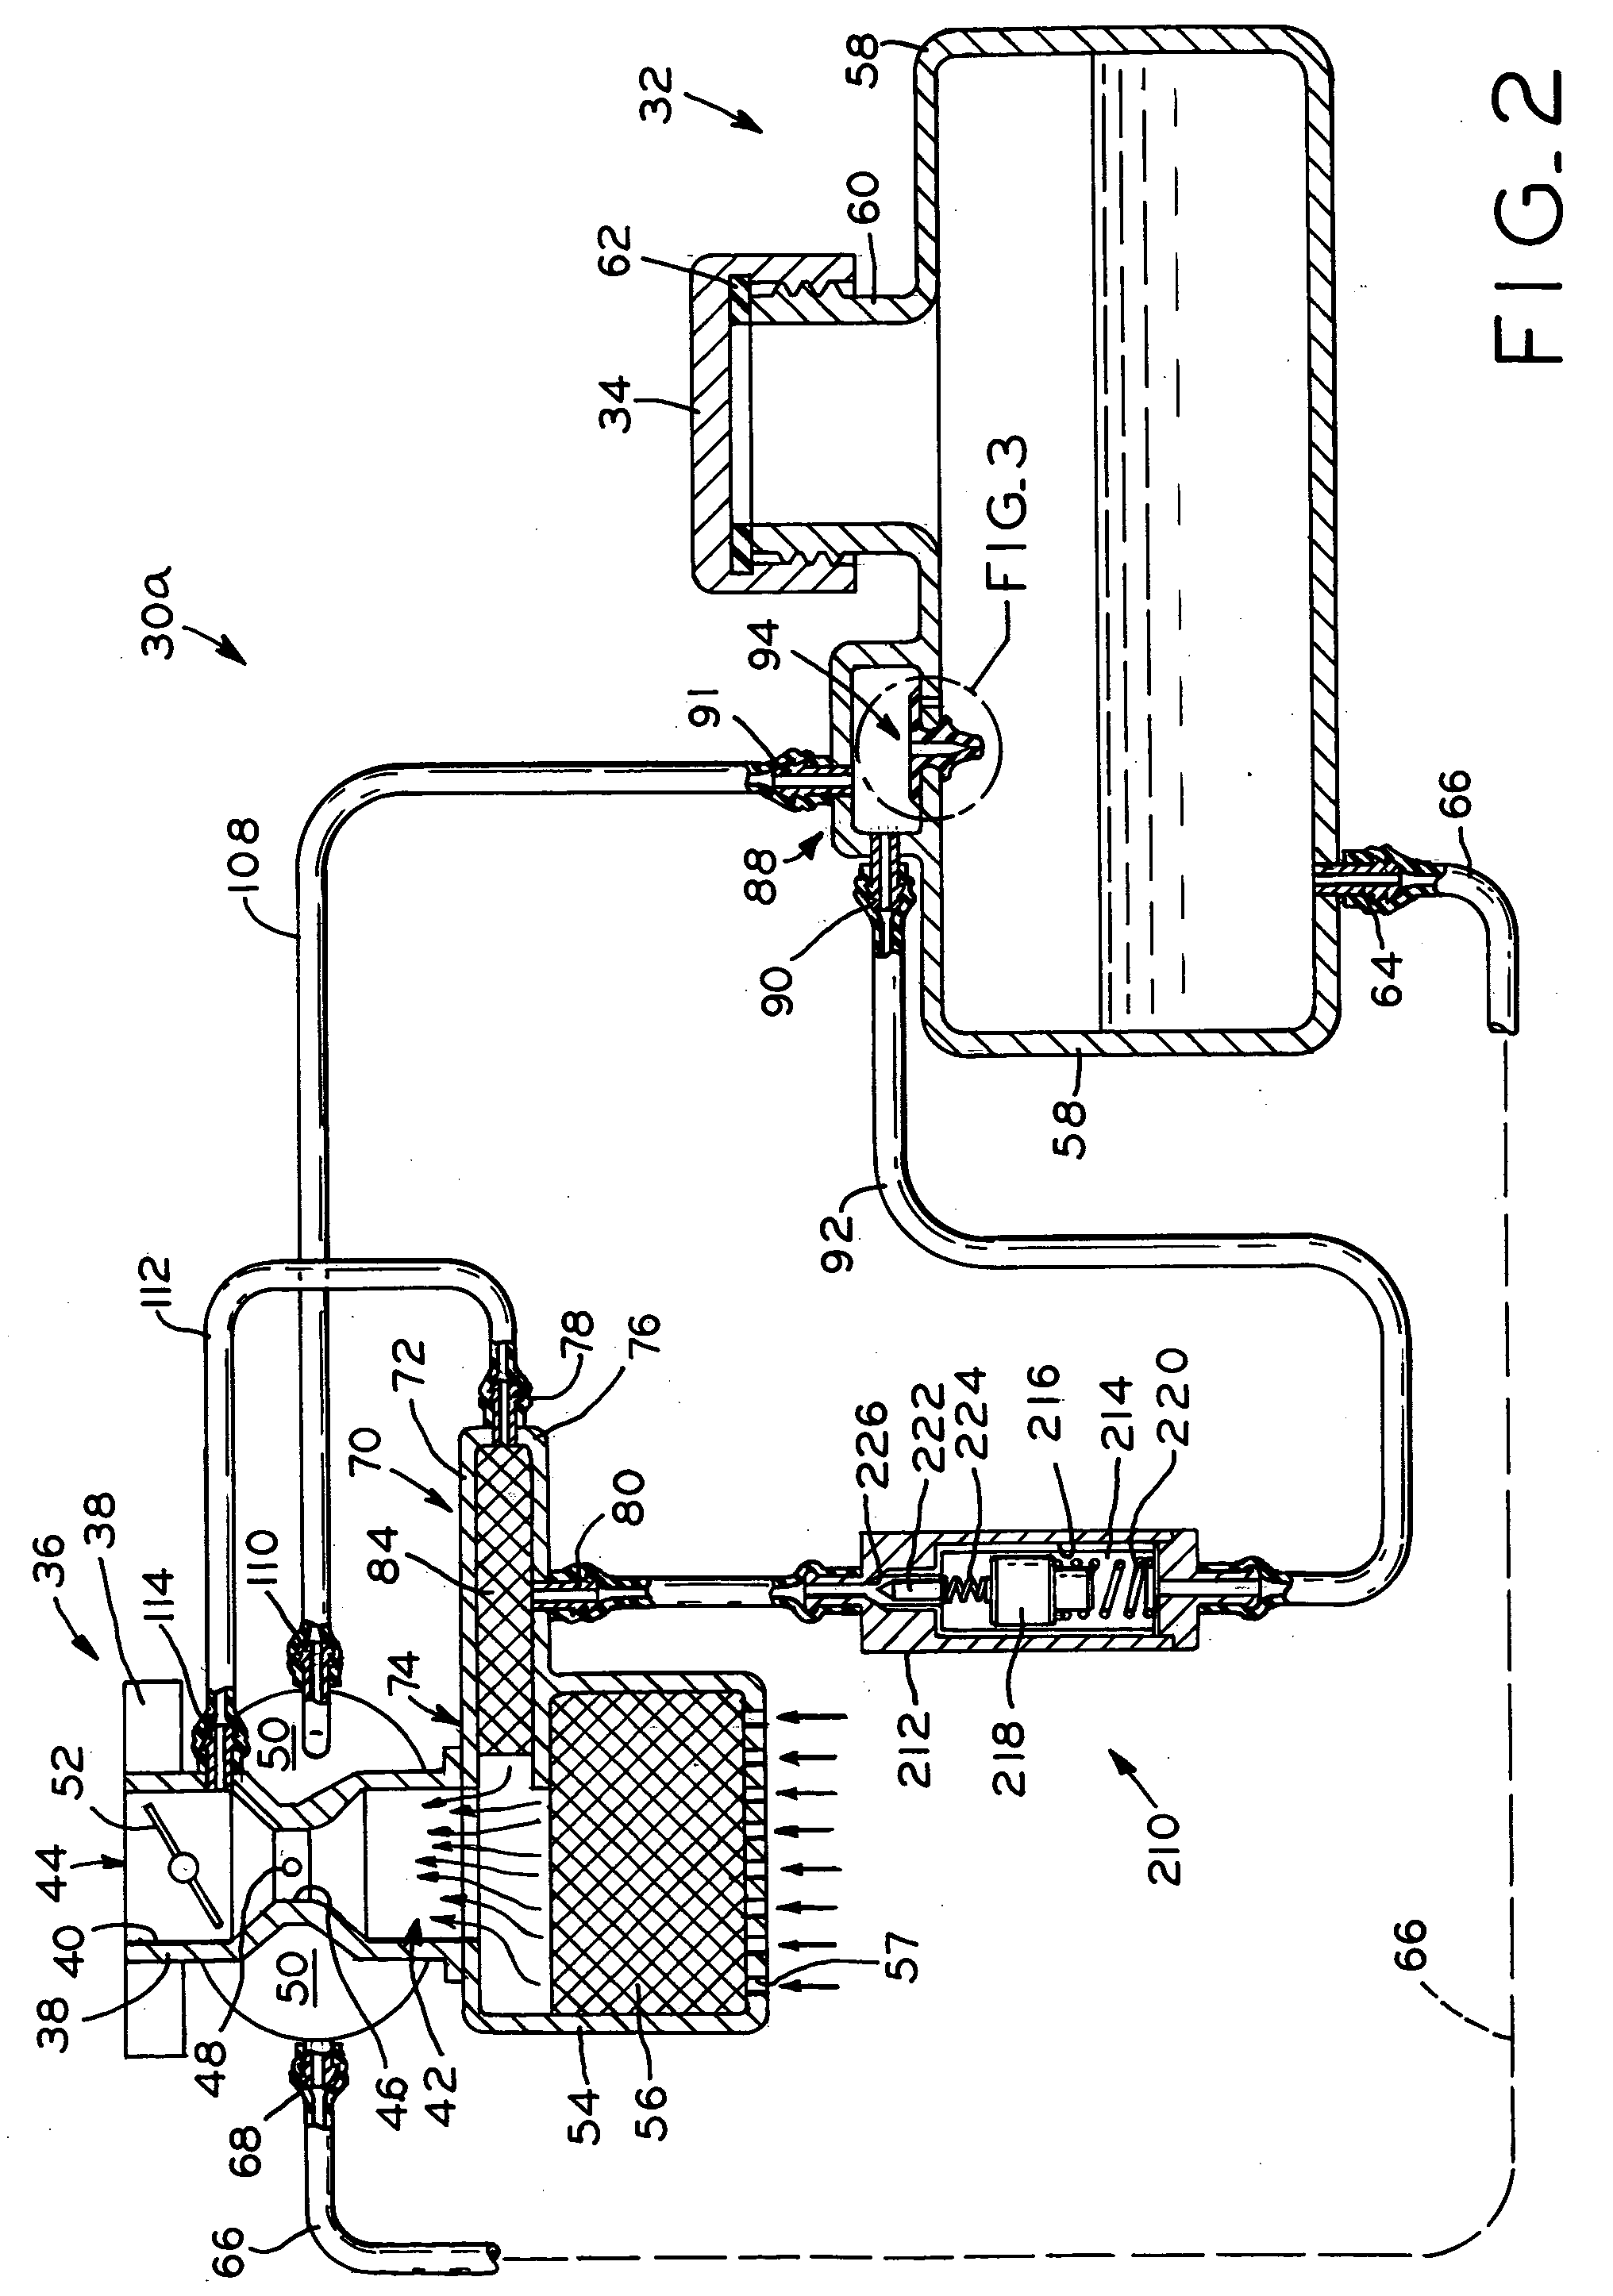 Evaporative emissions control system including a charcoal canister for small internal combustion engines